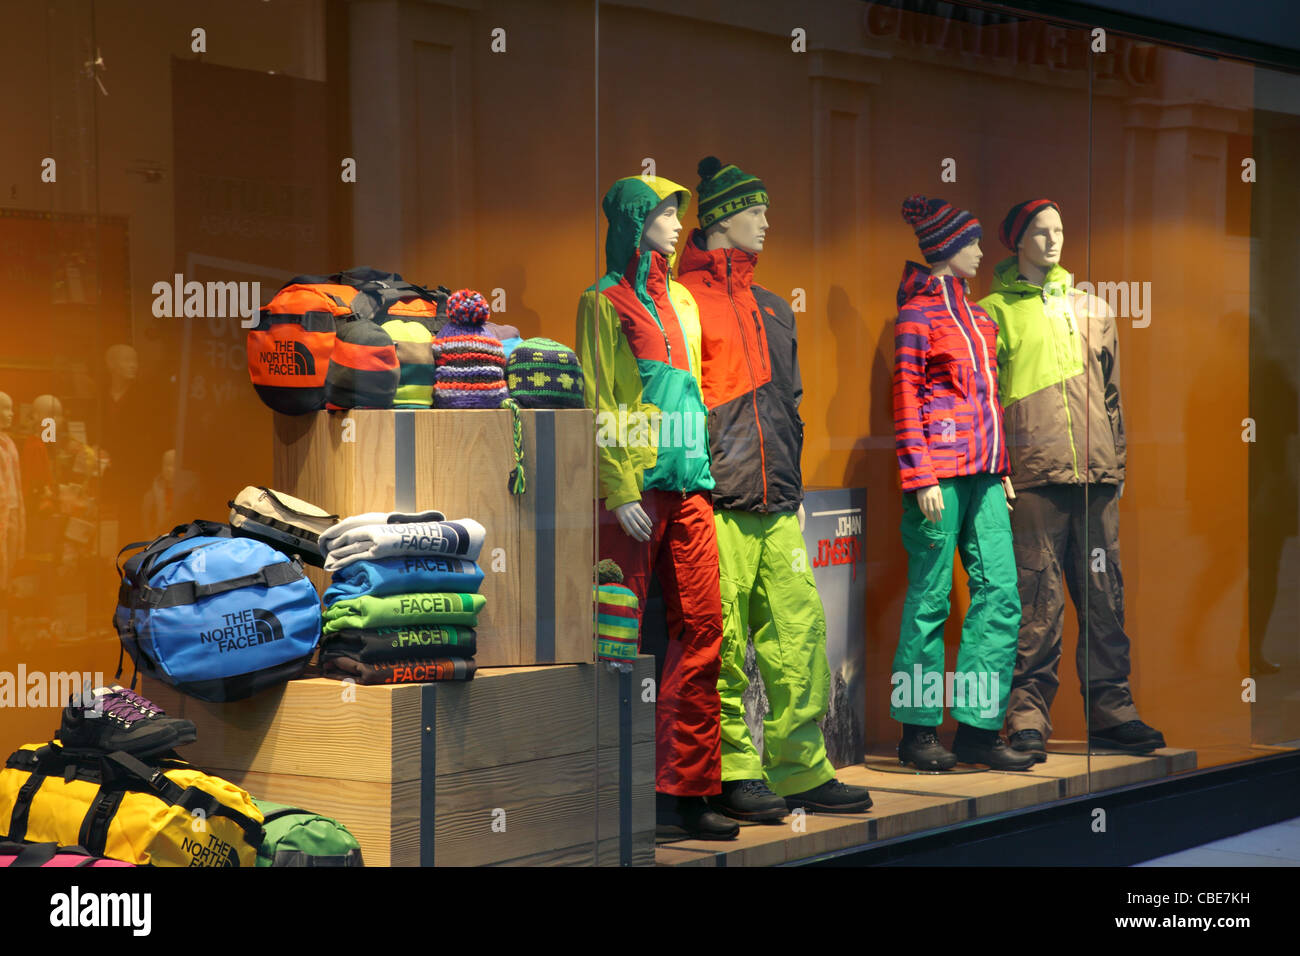 The north face shop hi-res stock photography and images - Alamy